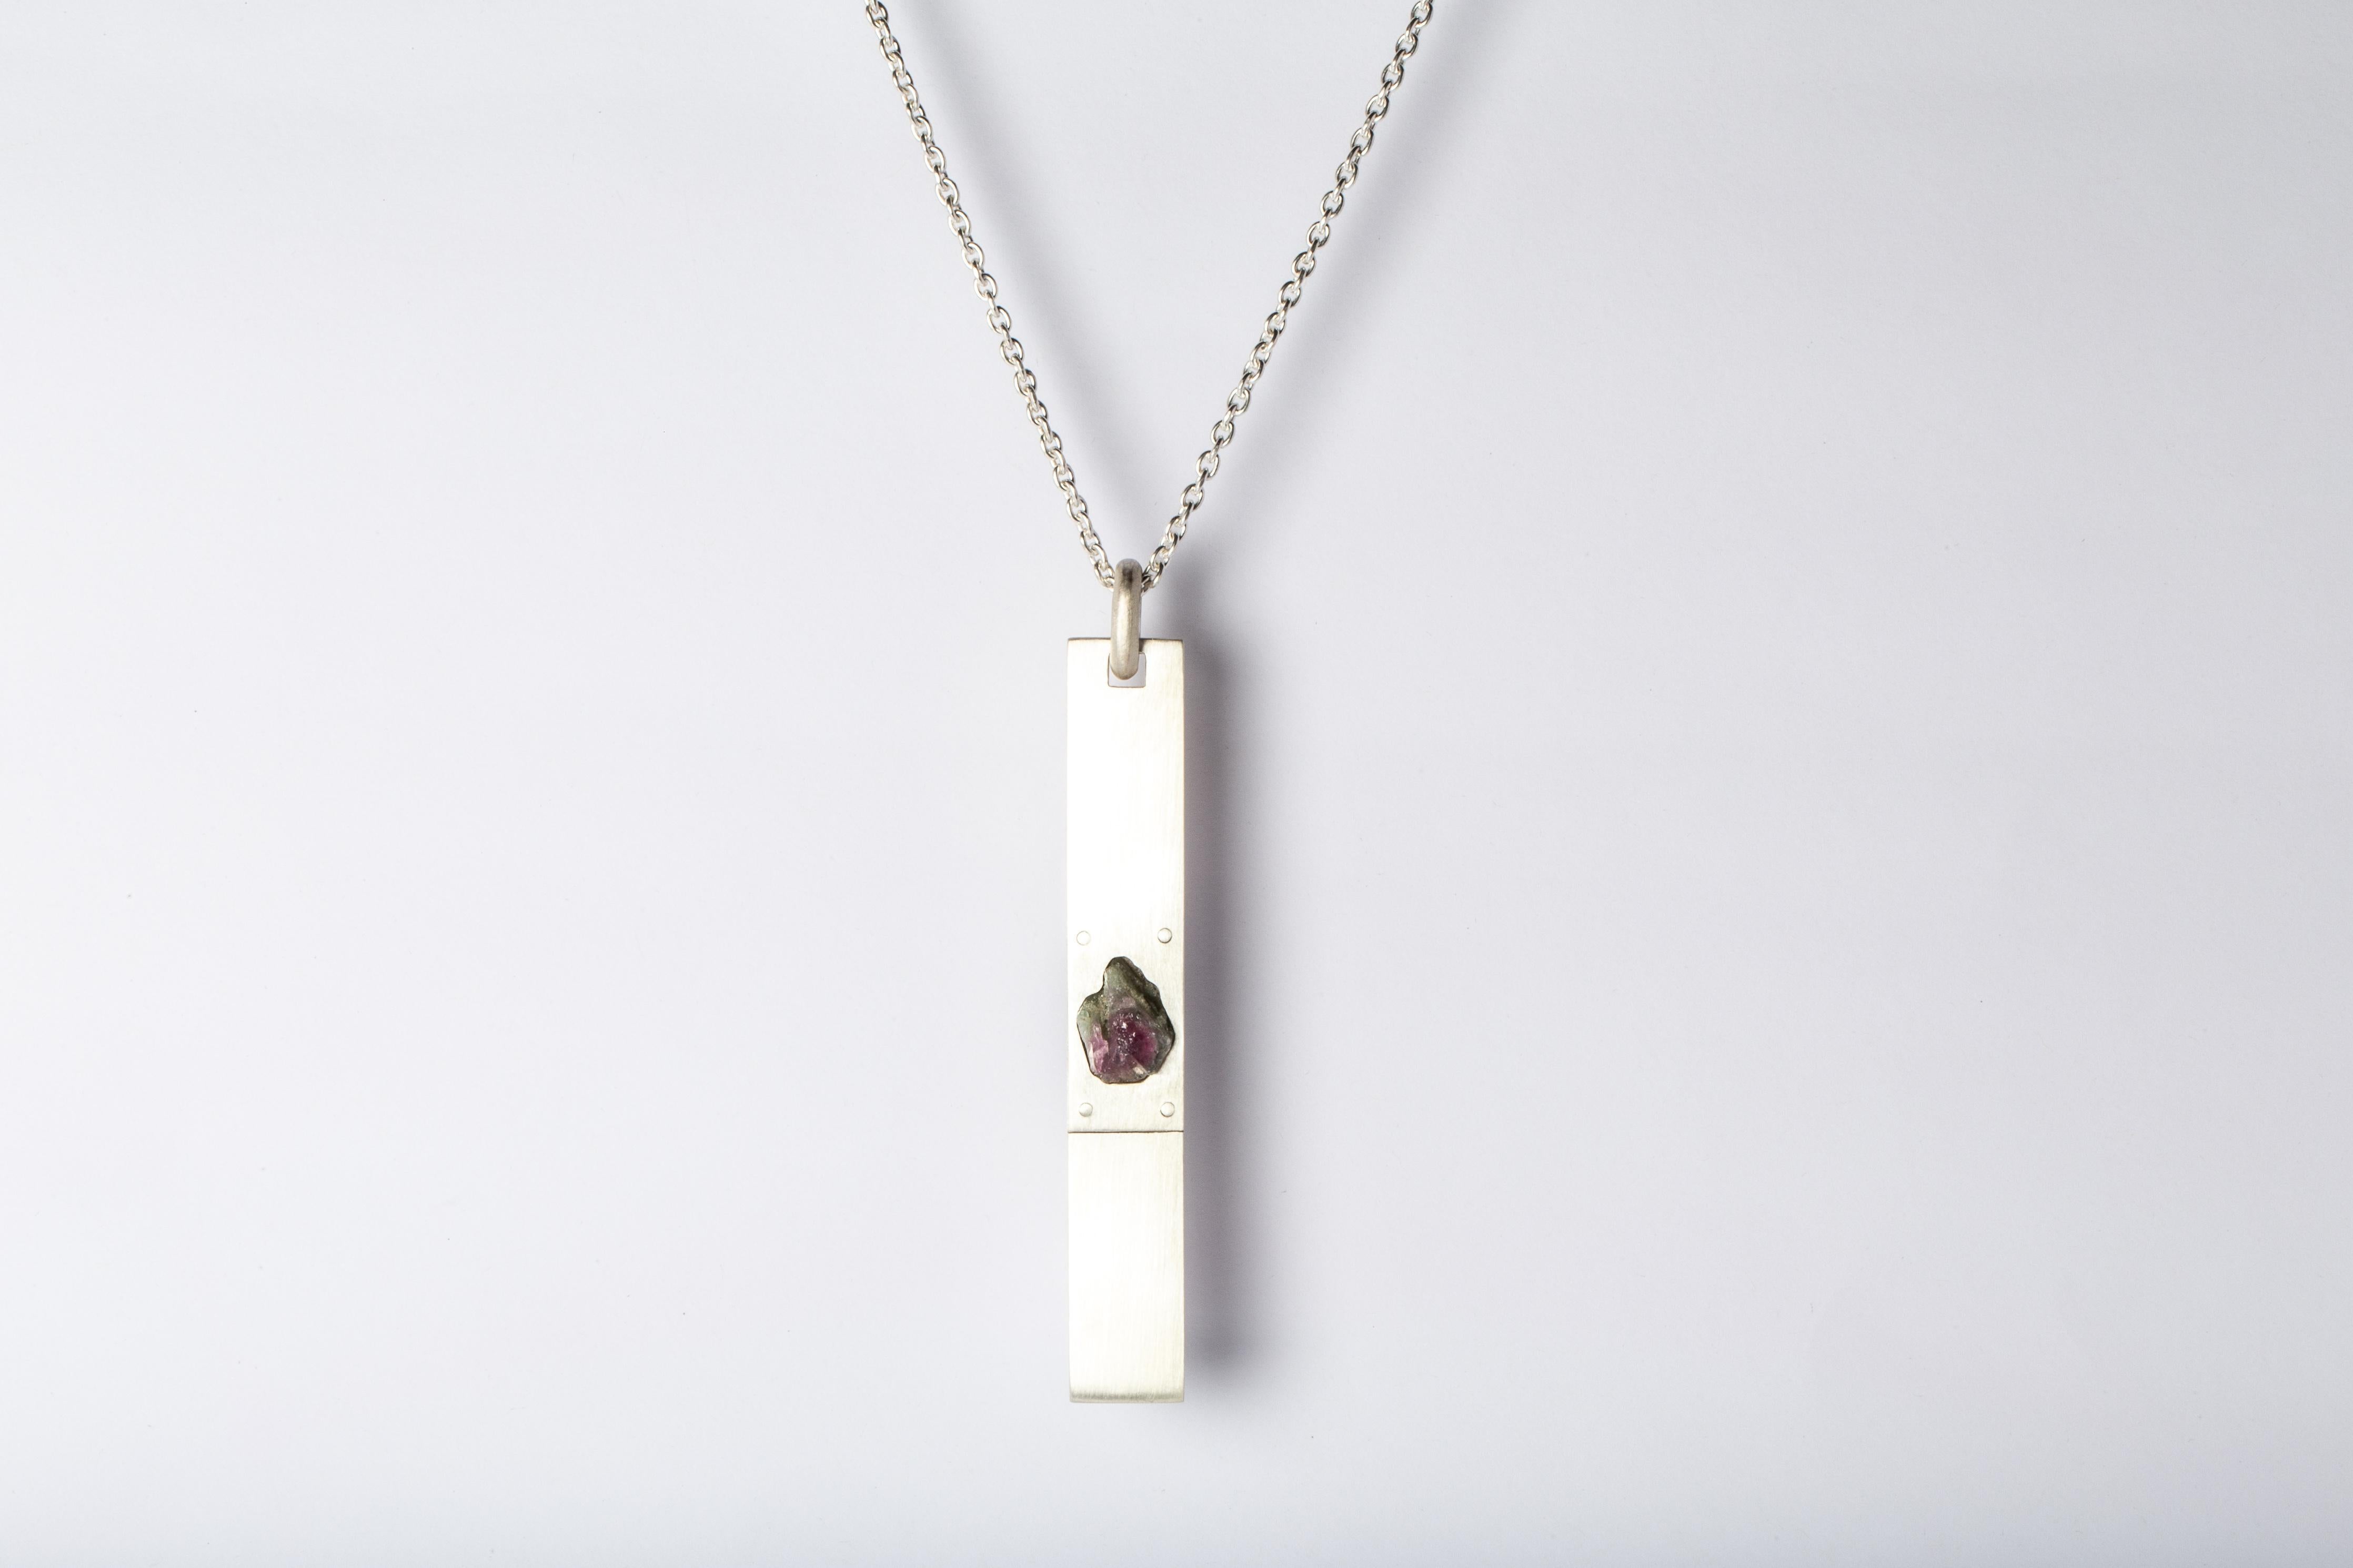 Necklace made in matte sterling silver and a rough of elbaite, a green-pink tourmaline color. The Amulet series seeks to encapsulate the energy of a mineral element(s). This family is a branch from the Talisman family and seeks to further explore